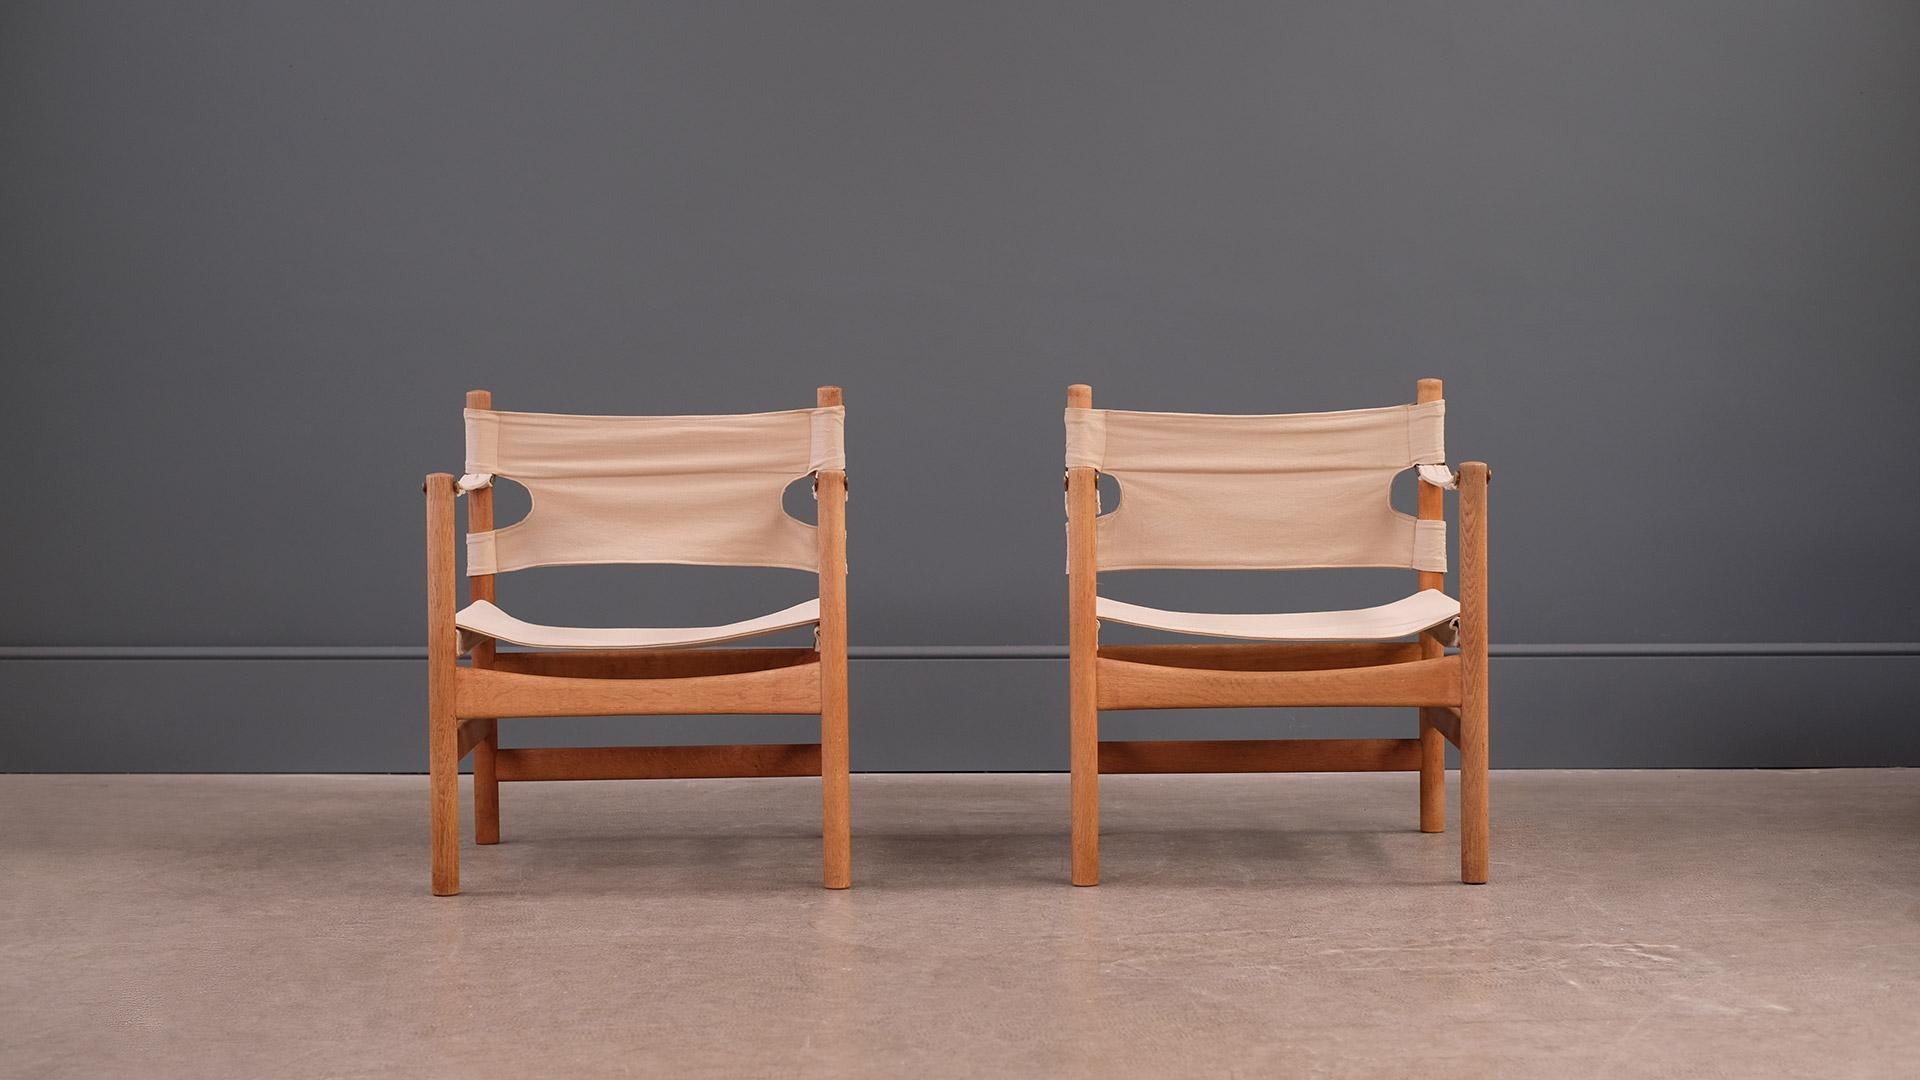 Very beautiful pair of Safari chairs in solid oak and brass with original slung cotton canvas seats designed by Borge Mogensen for Fredericia, Denmark. Rarely seen very high quality chairs and super comfortable too.